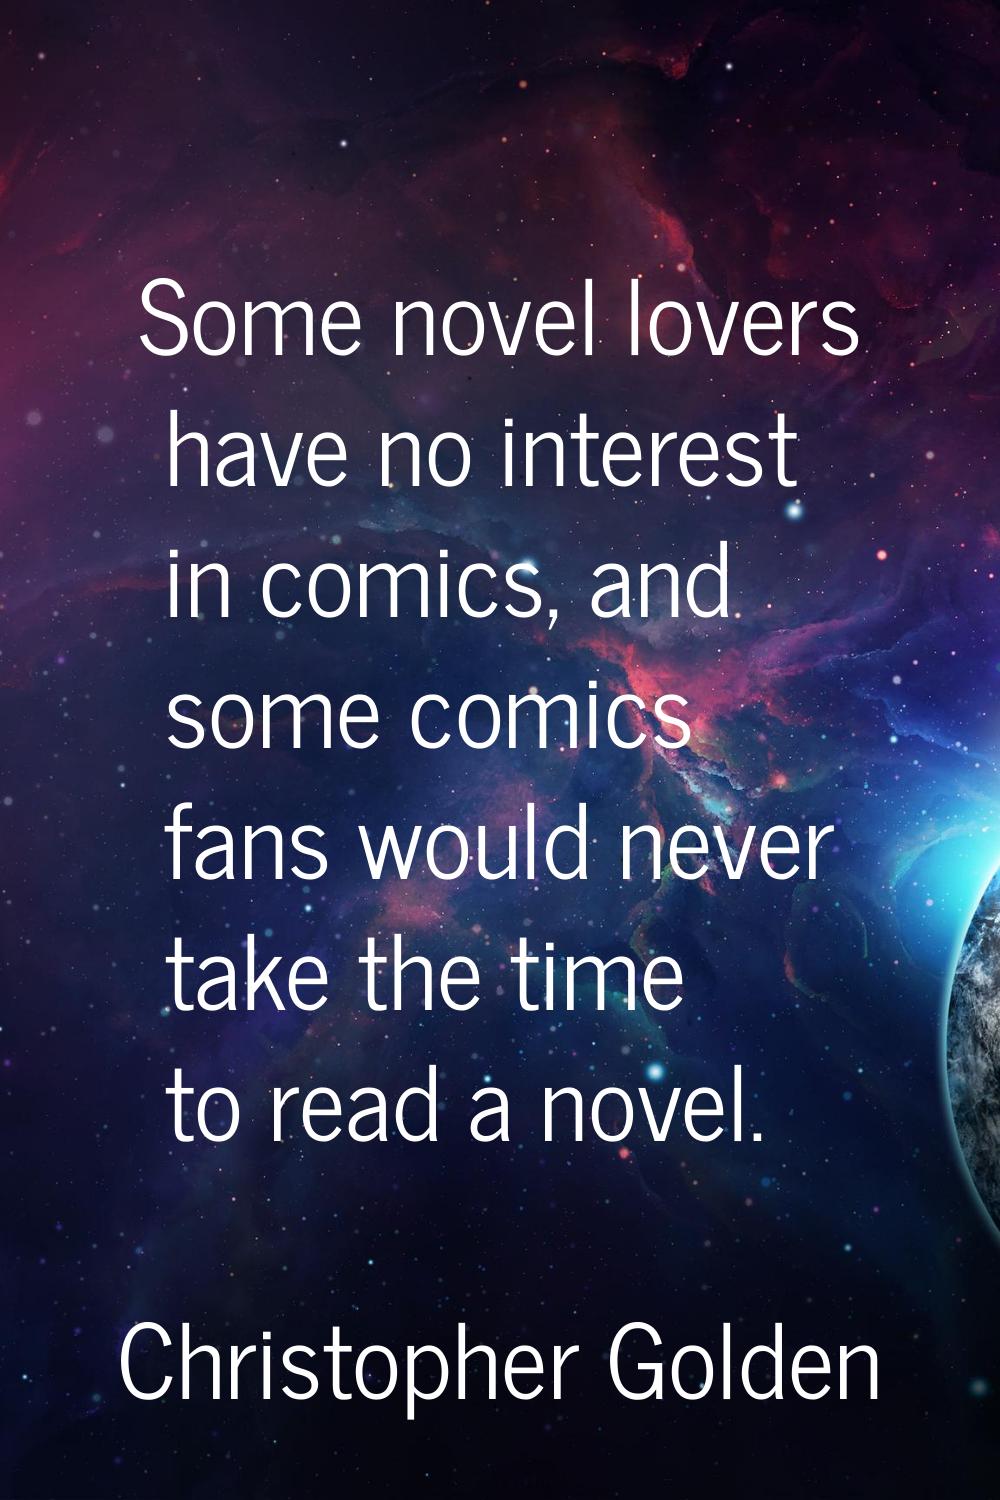 Some novel lovers have no interest in comics, and some comics fans would never take the time to rea